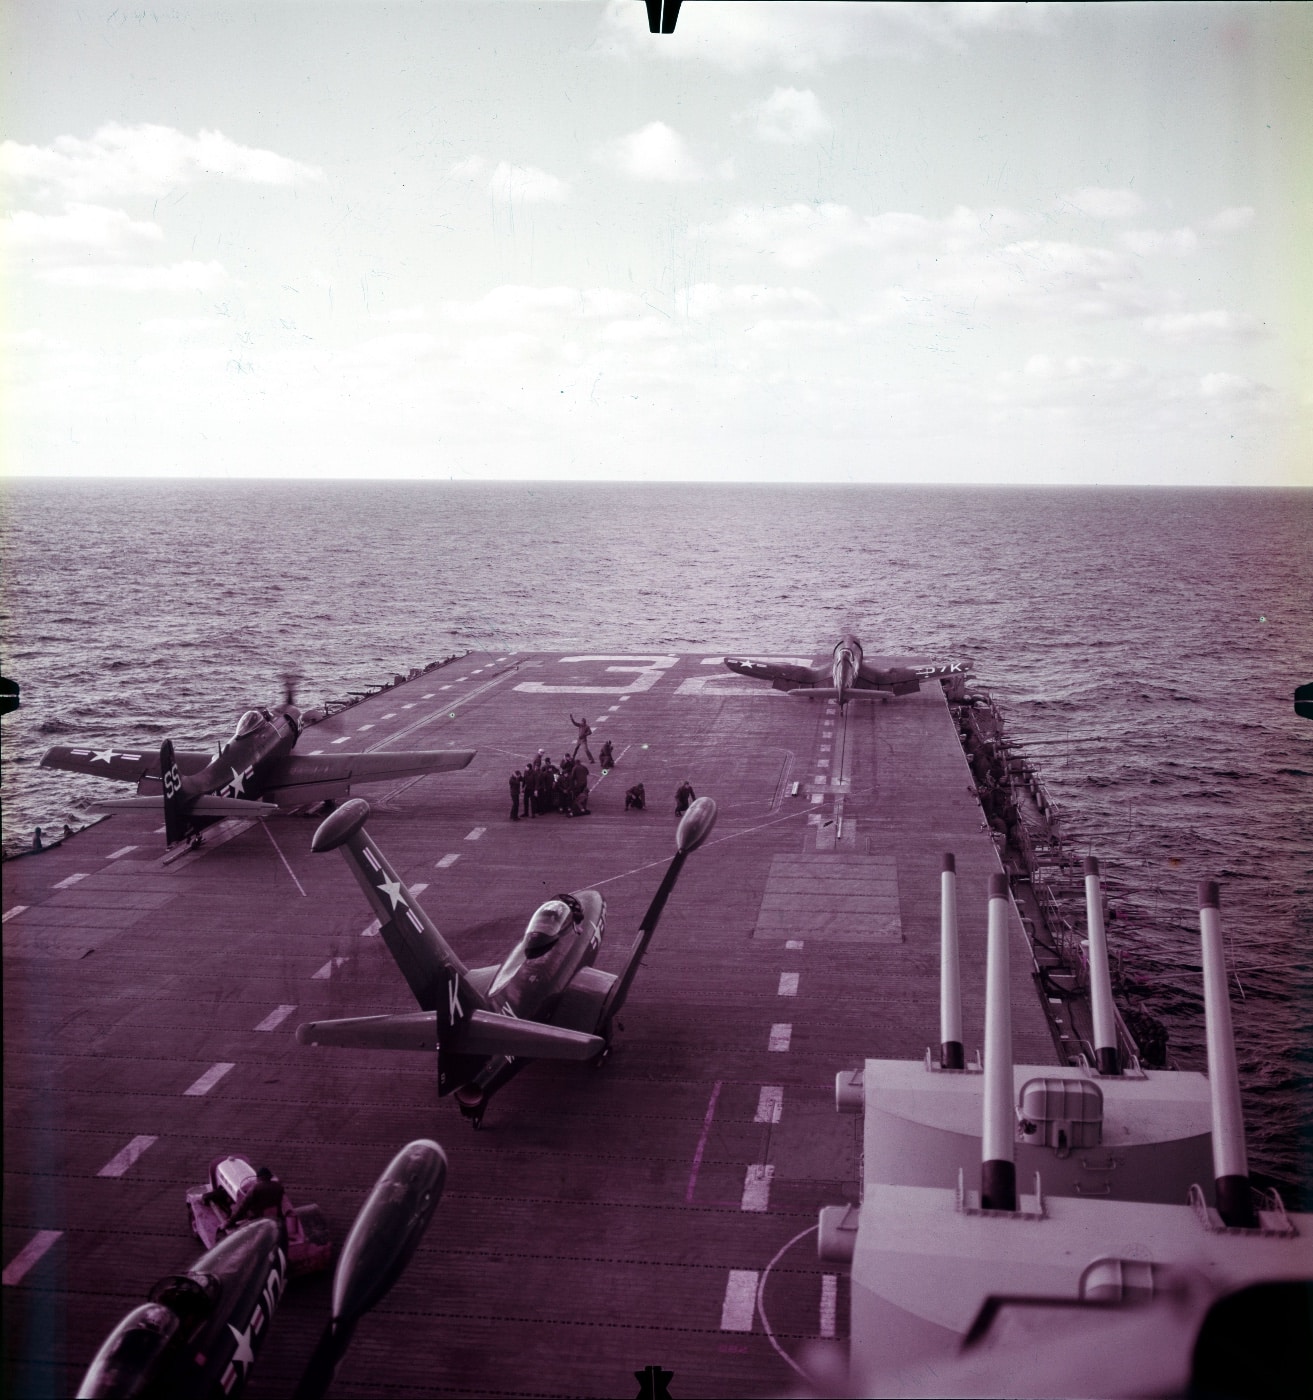 a-1 skyraider launches from uss leyte during korean war